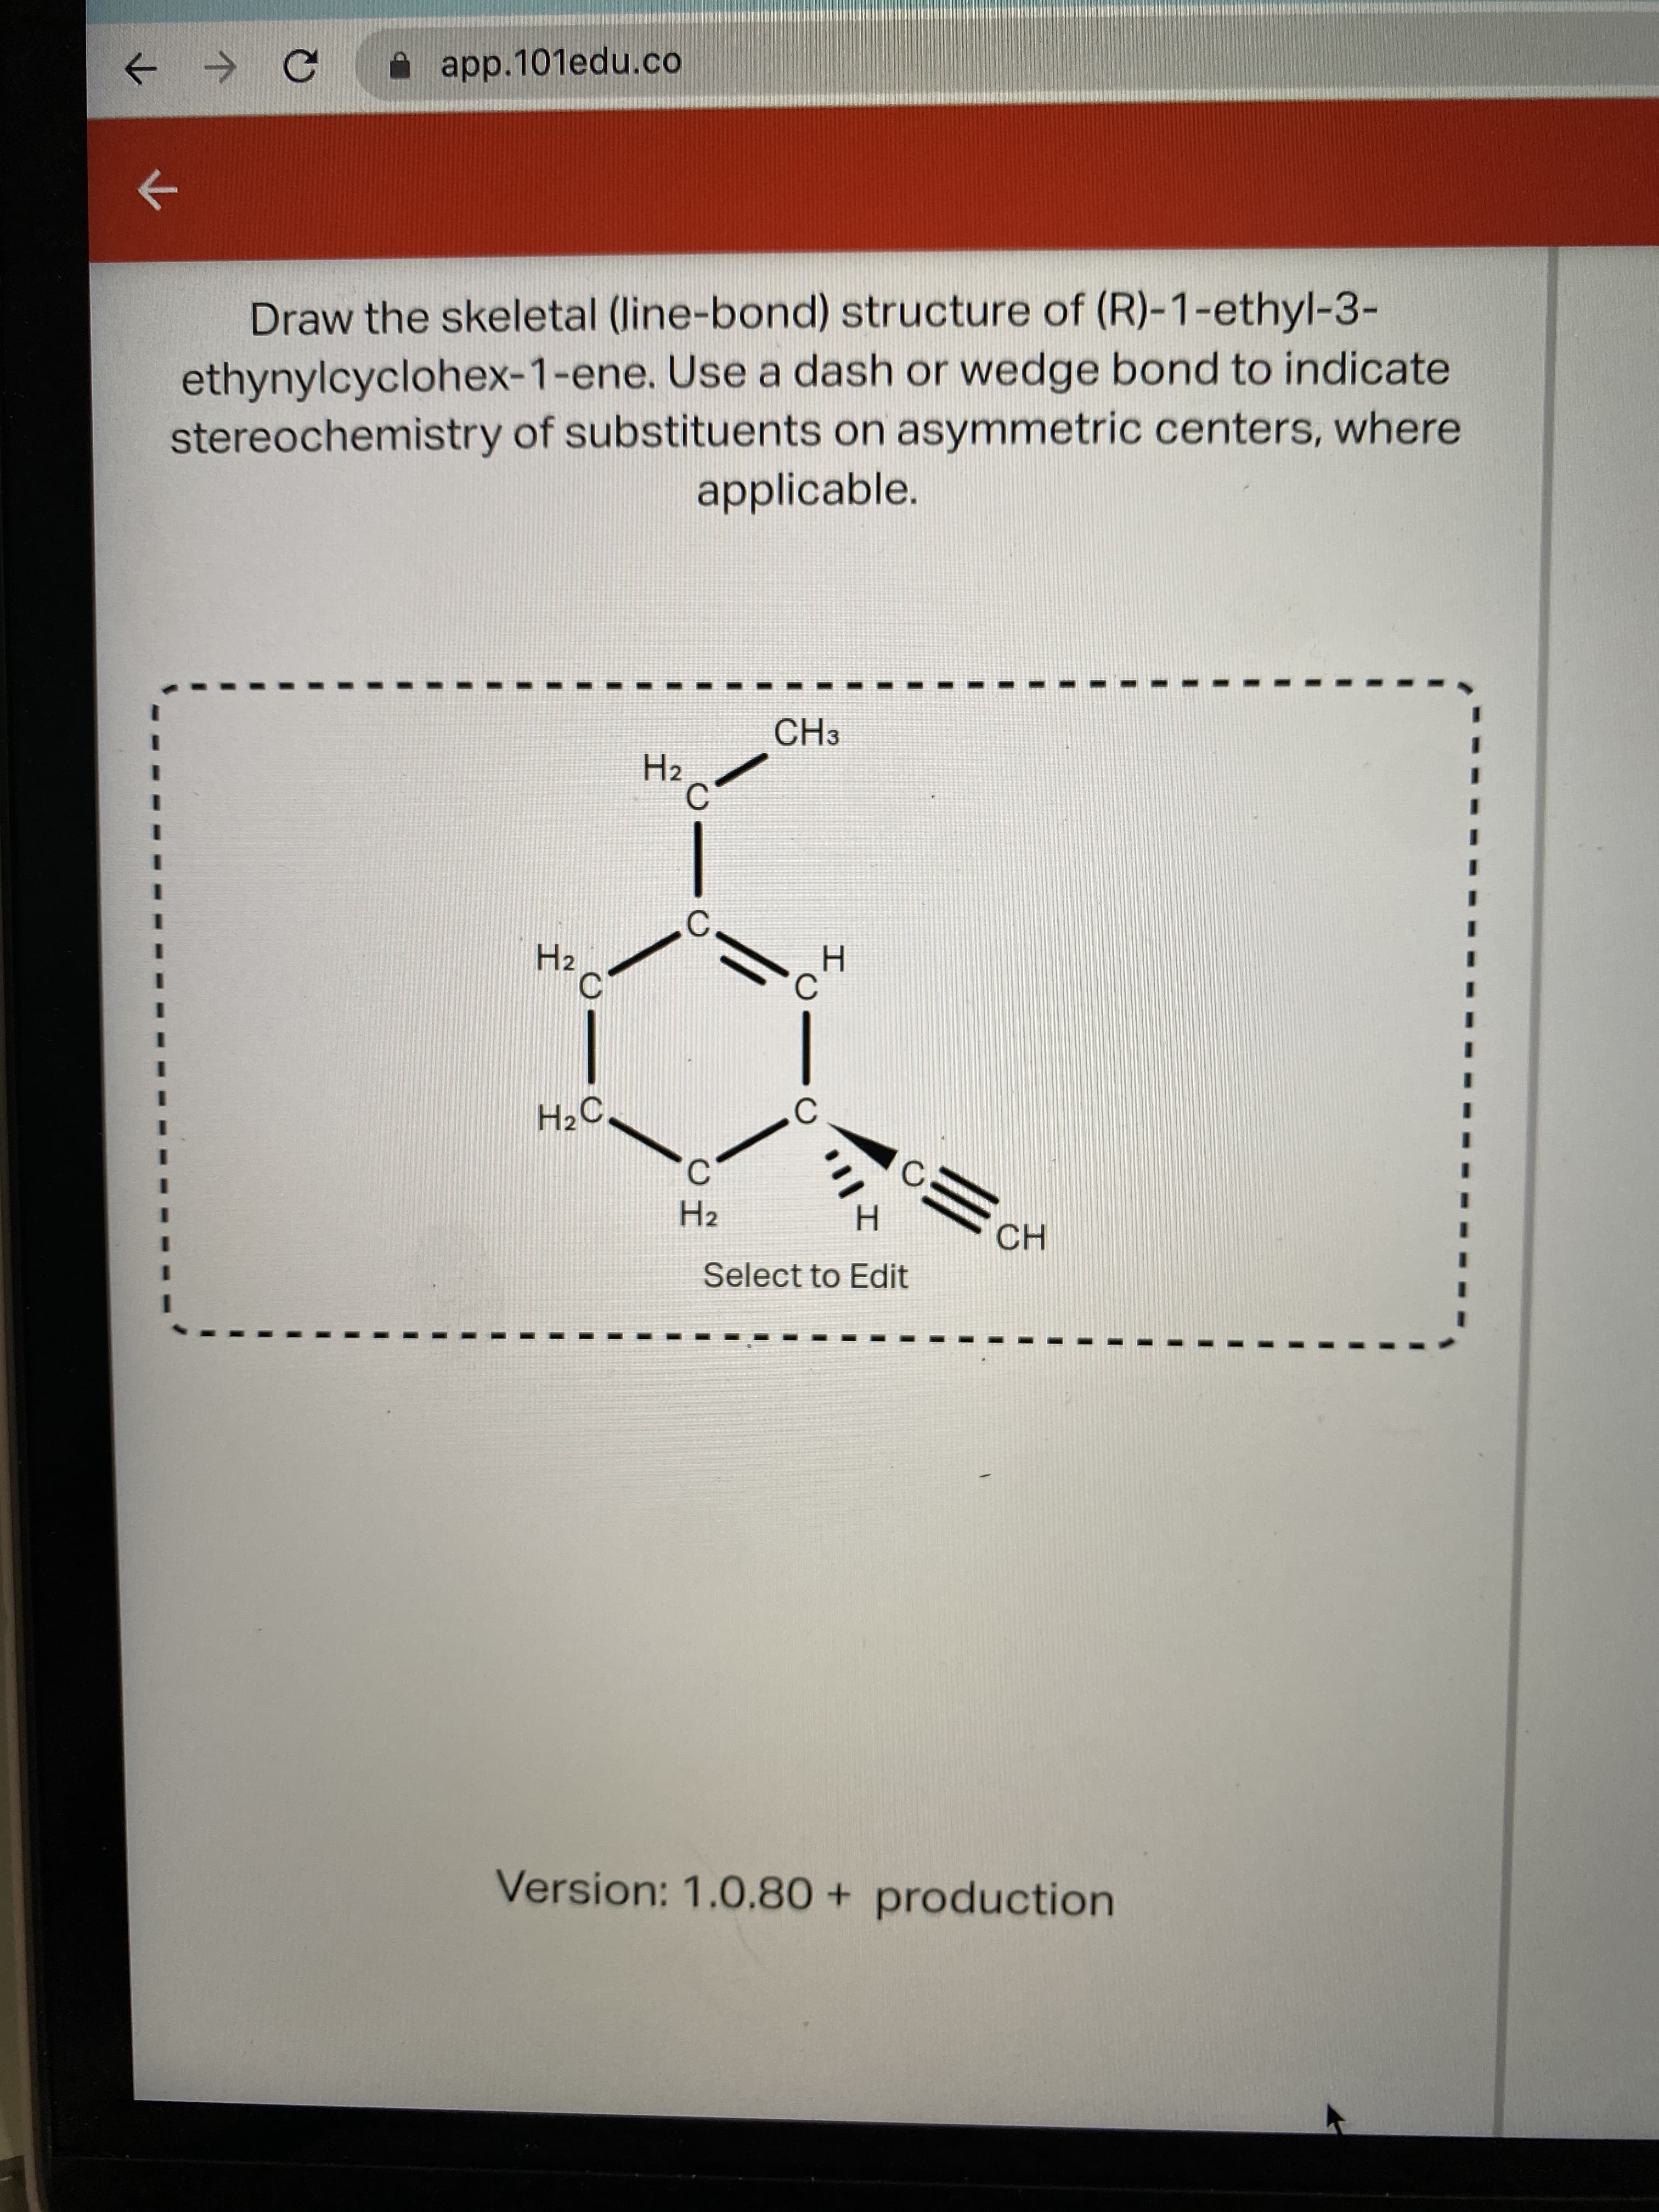 A app.101edu.co
Draw the skeletal (line-bond) structure of (R)-1-ethyl-3-
ethynylcyclohex-1-ene. Use a dash or wedge bond to indicate
stereochemistry of substituents on asymmetric centers, where
applicable.
CH3
H2
C
H2
H2
Select to Edit
CH
Version: 1.0.80 + production
